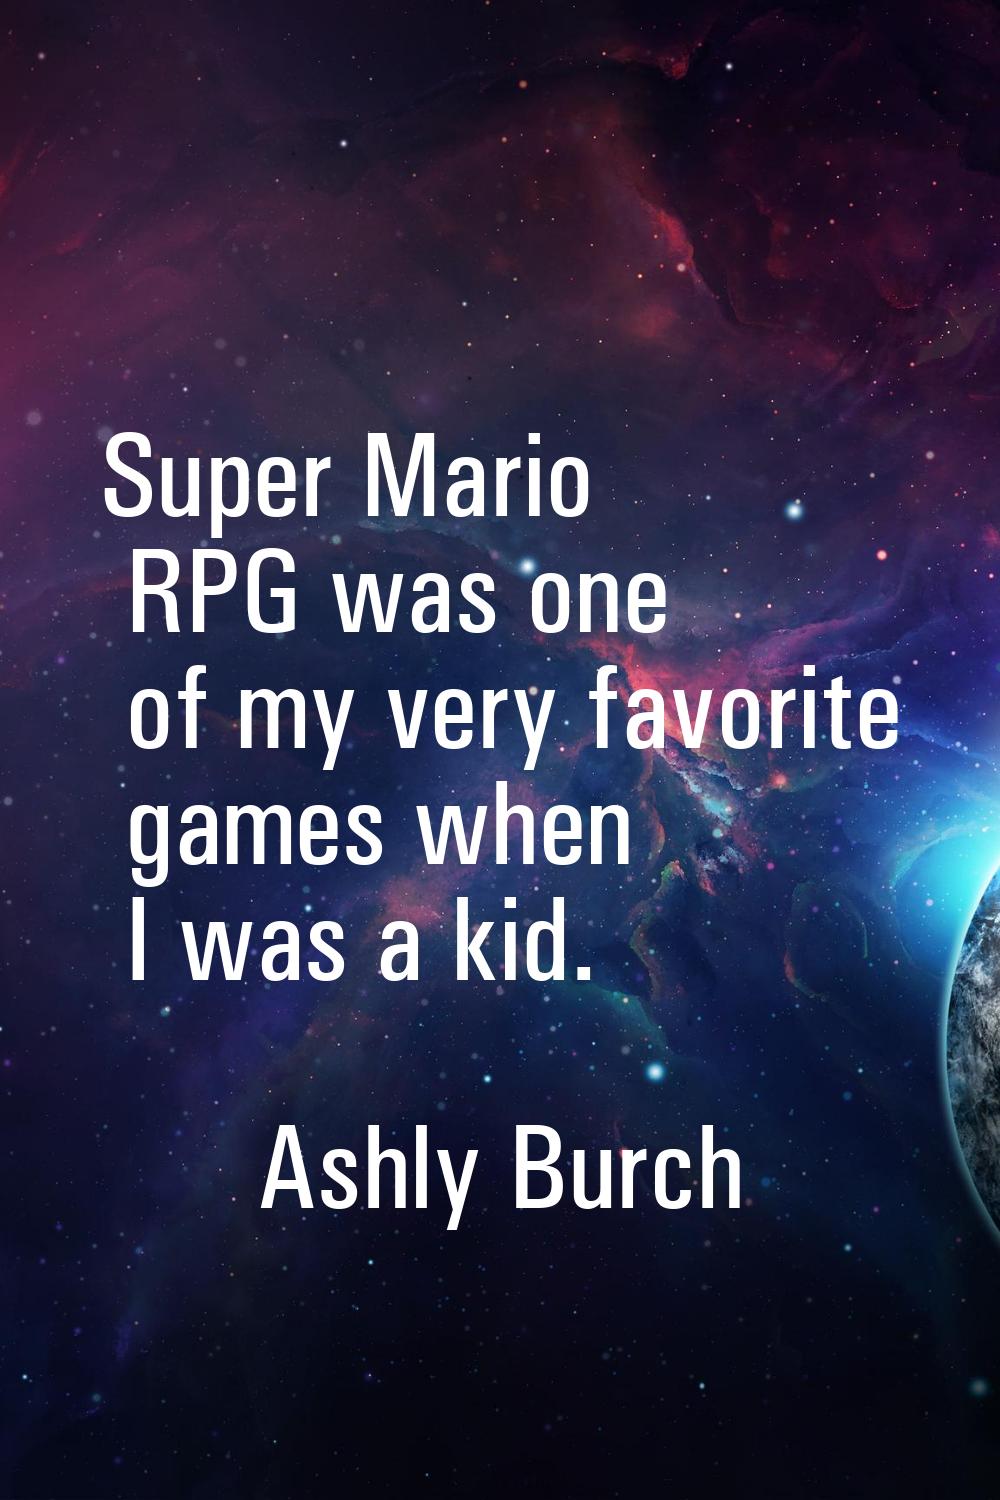 Super Mario RPG was one of my very favorite games when I was a kid.